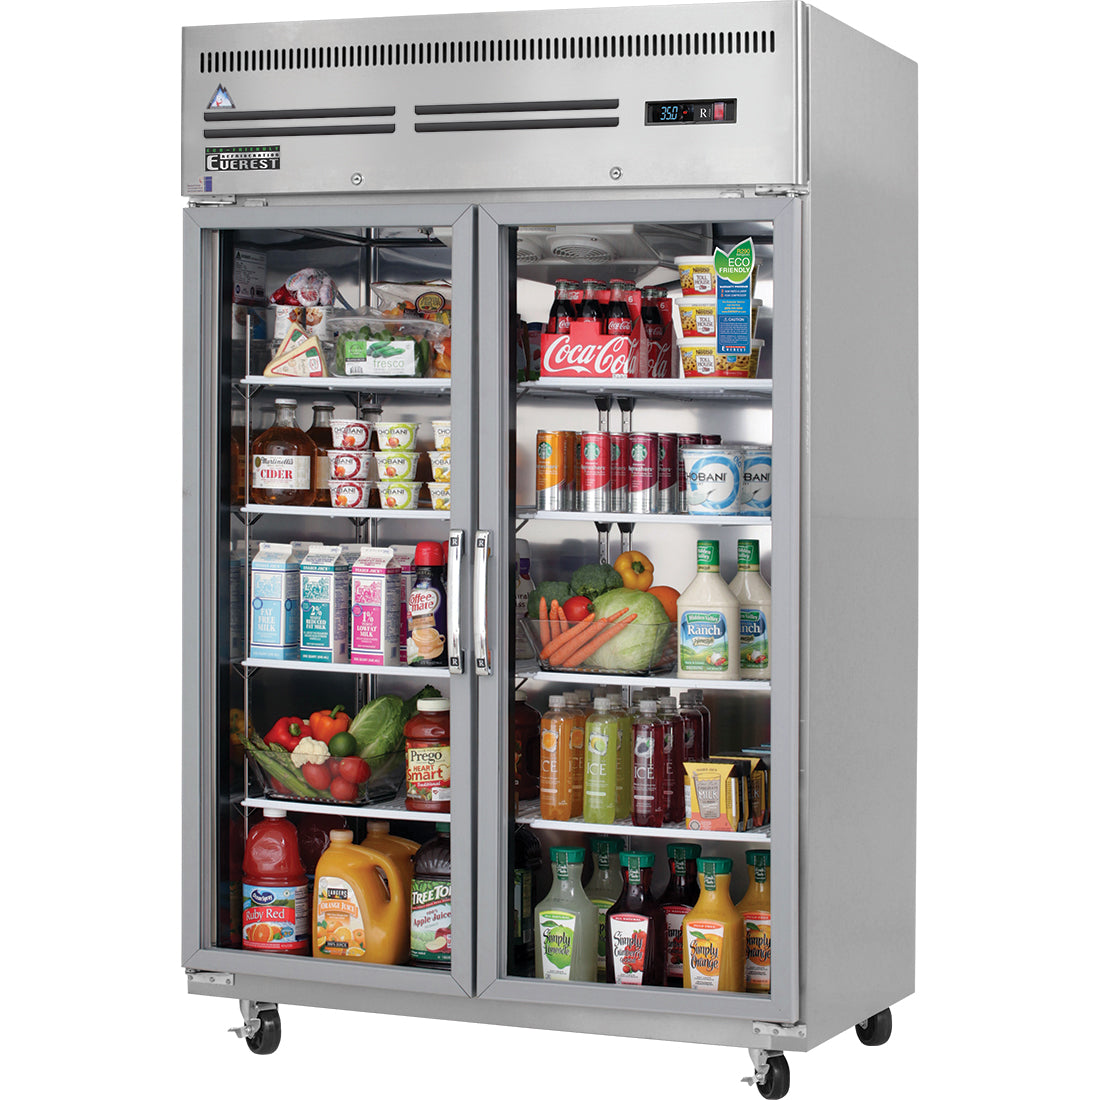 Everest ES Series-ESGR2 Two Section Glass Door Upright Reach-In Refrigerator - 48 Cu. Ft.